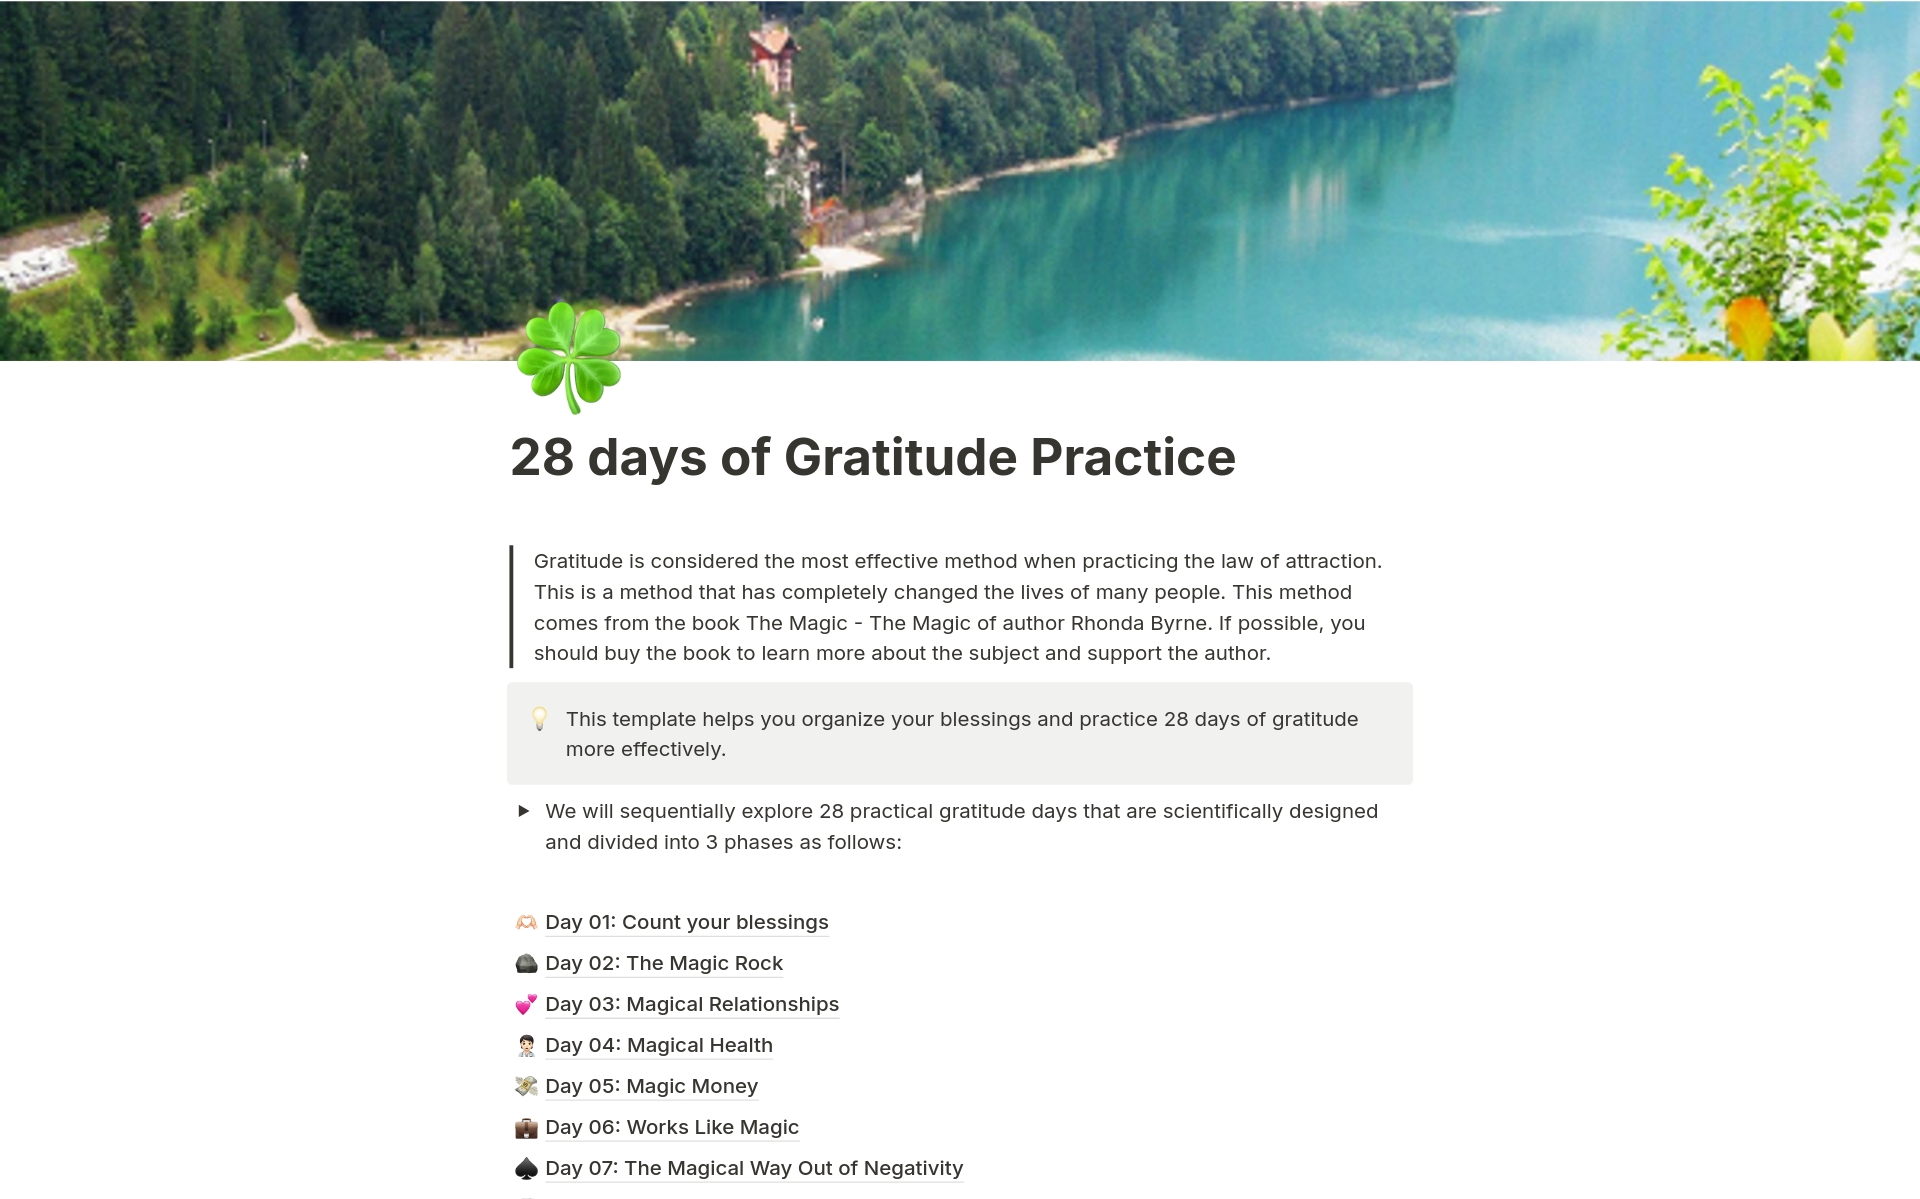 A template preview for 28 days of Gratitude Practice